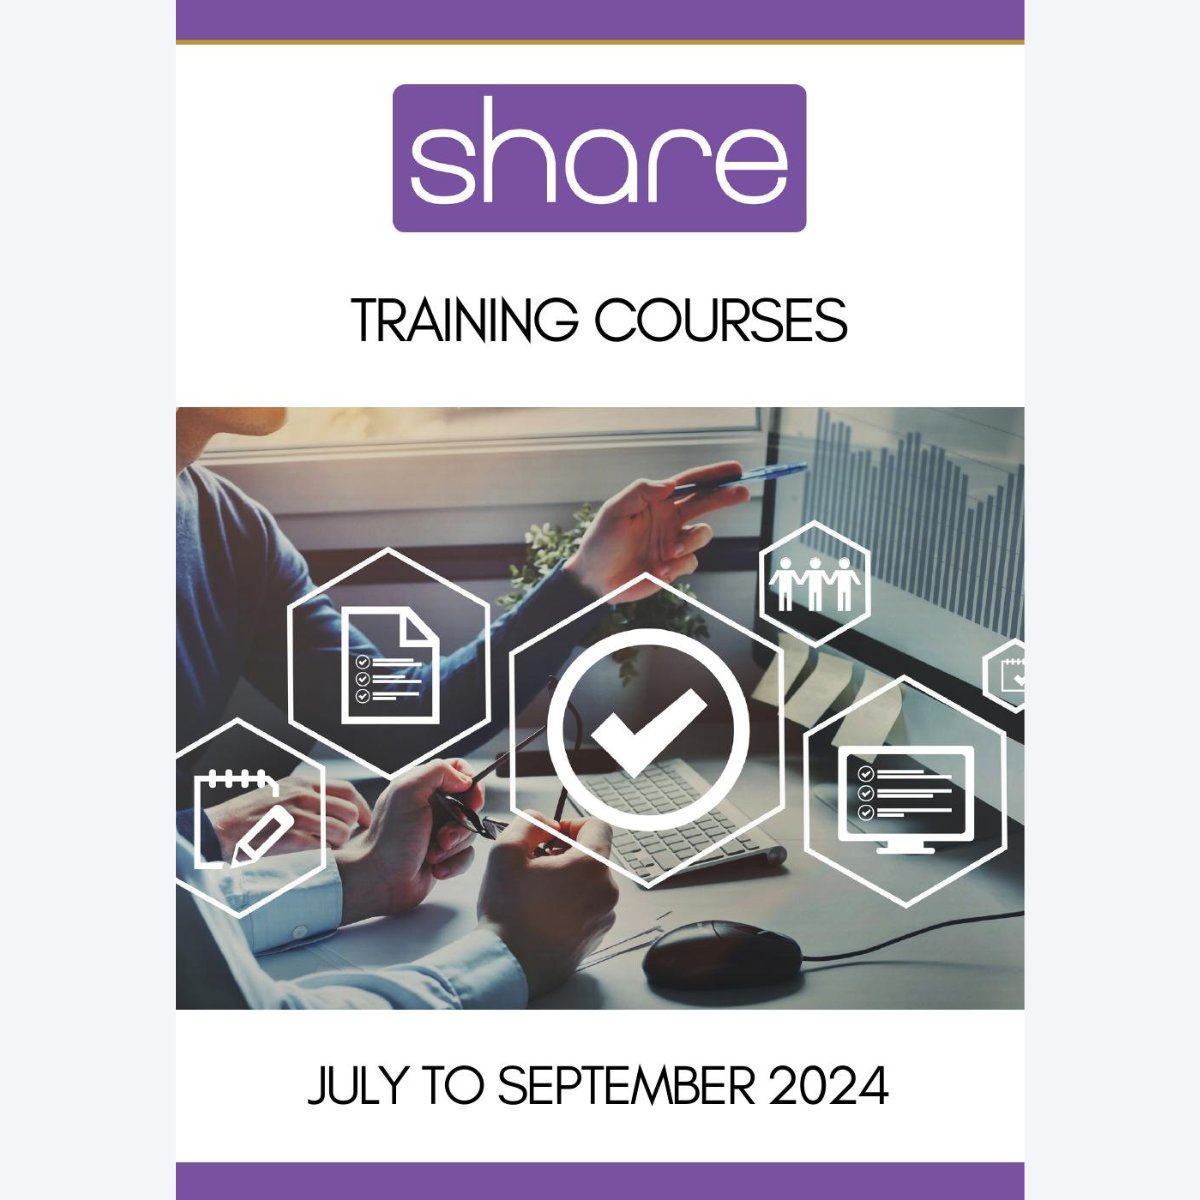 📢 Hot off the press... Share's July to September Training Course brochure has launched! Read now at lght.ly/7dk5128